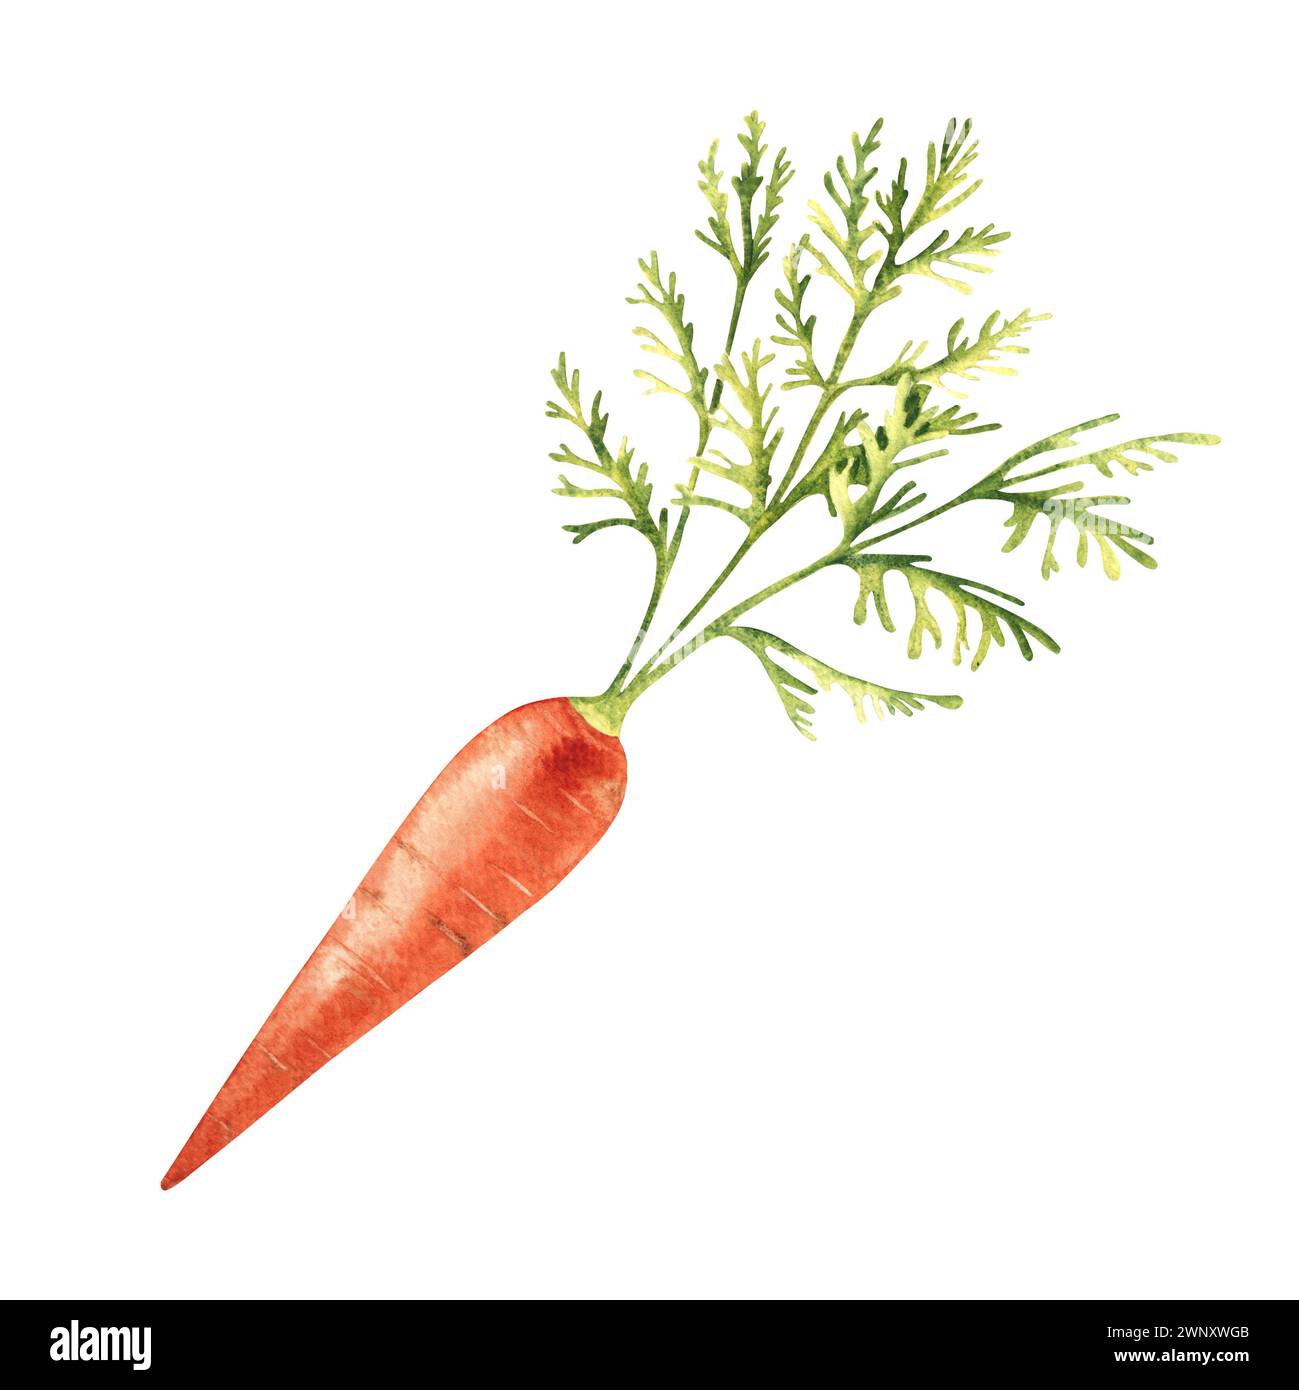 Carrot hand drawn botanical watercolor illustration on white background. Stock Photo